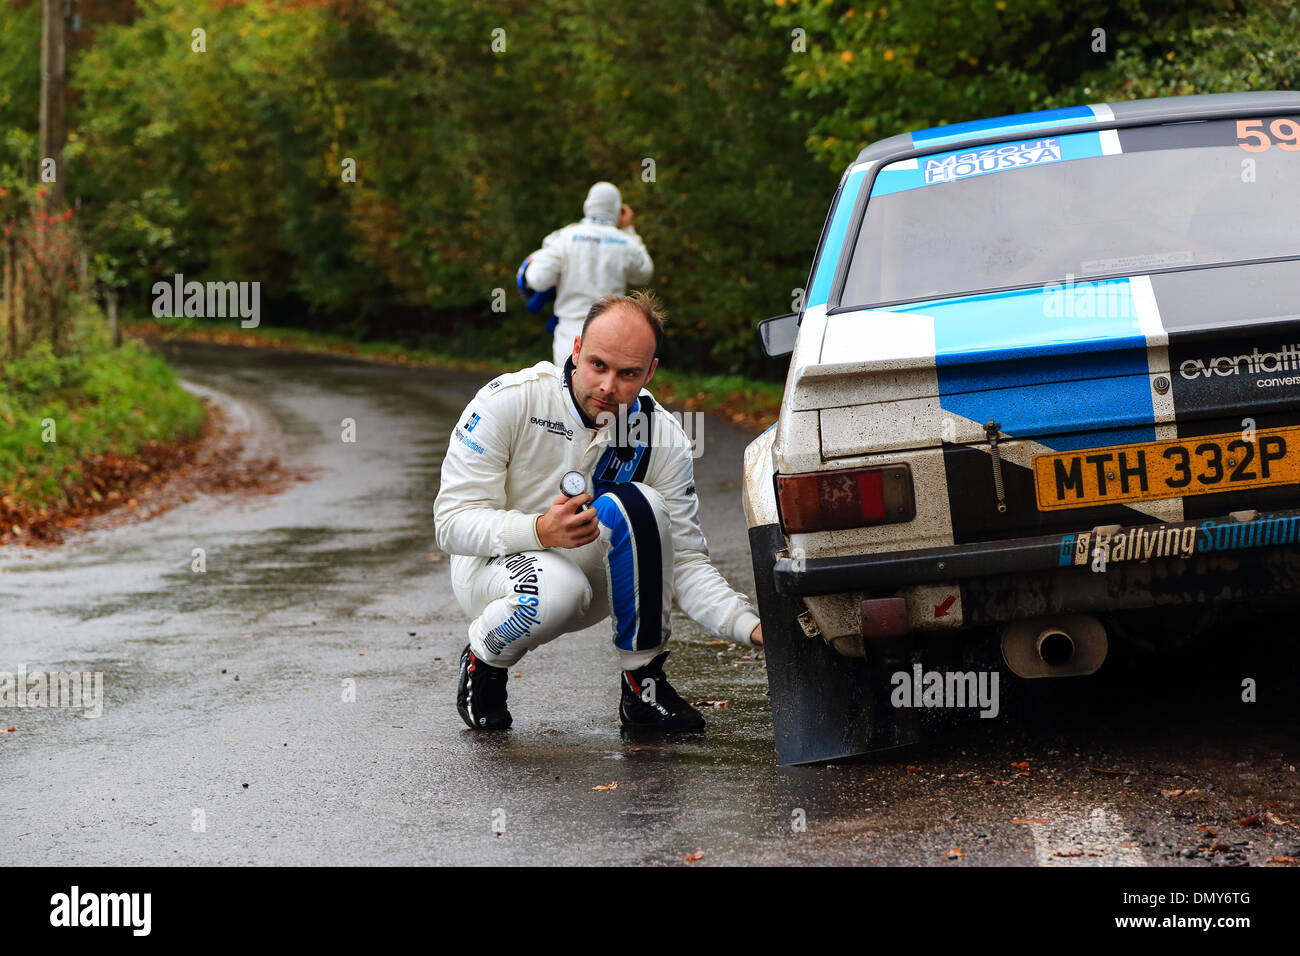 Male pilot checking tire air pressure during a rally race car. Condroz rally race in Belgium, 2013 Stock Photo